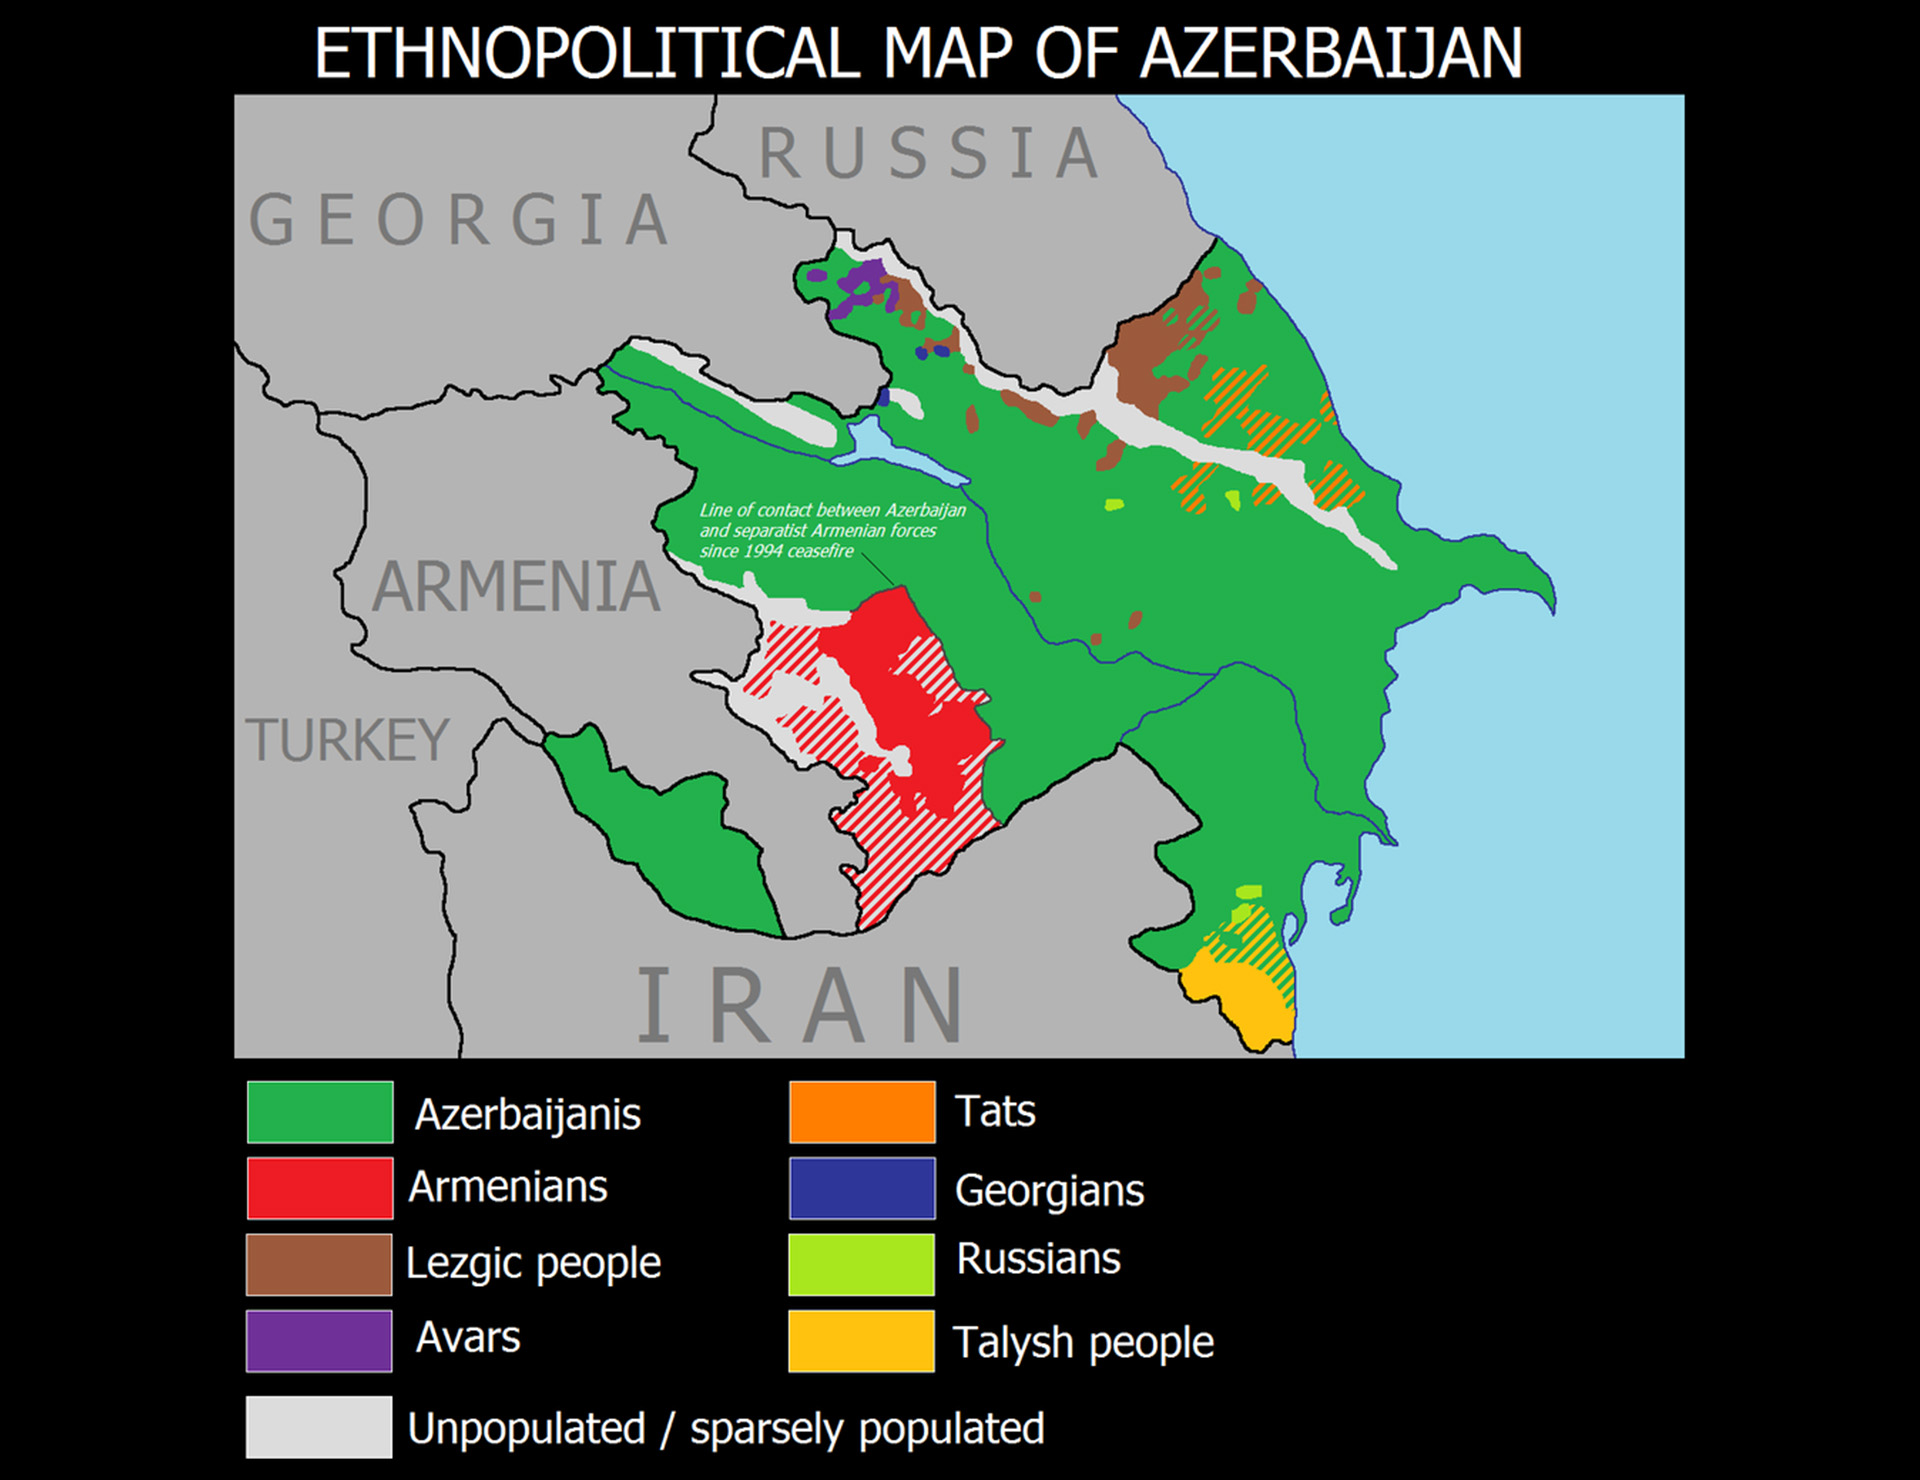 Karabakh conflict: Armenia and the ethnic card